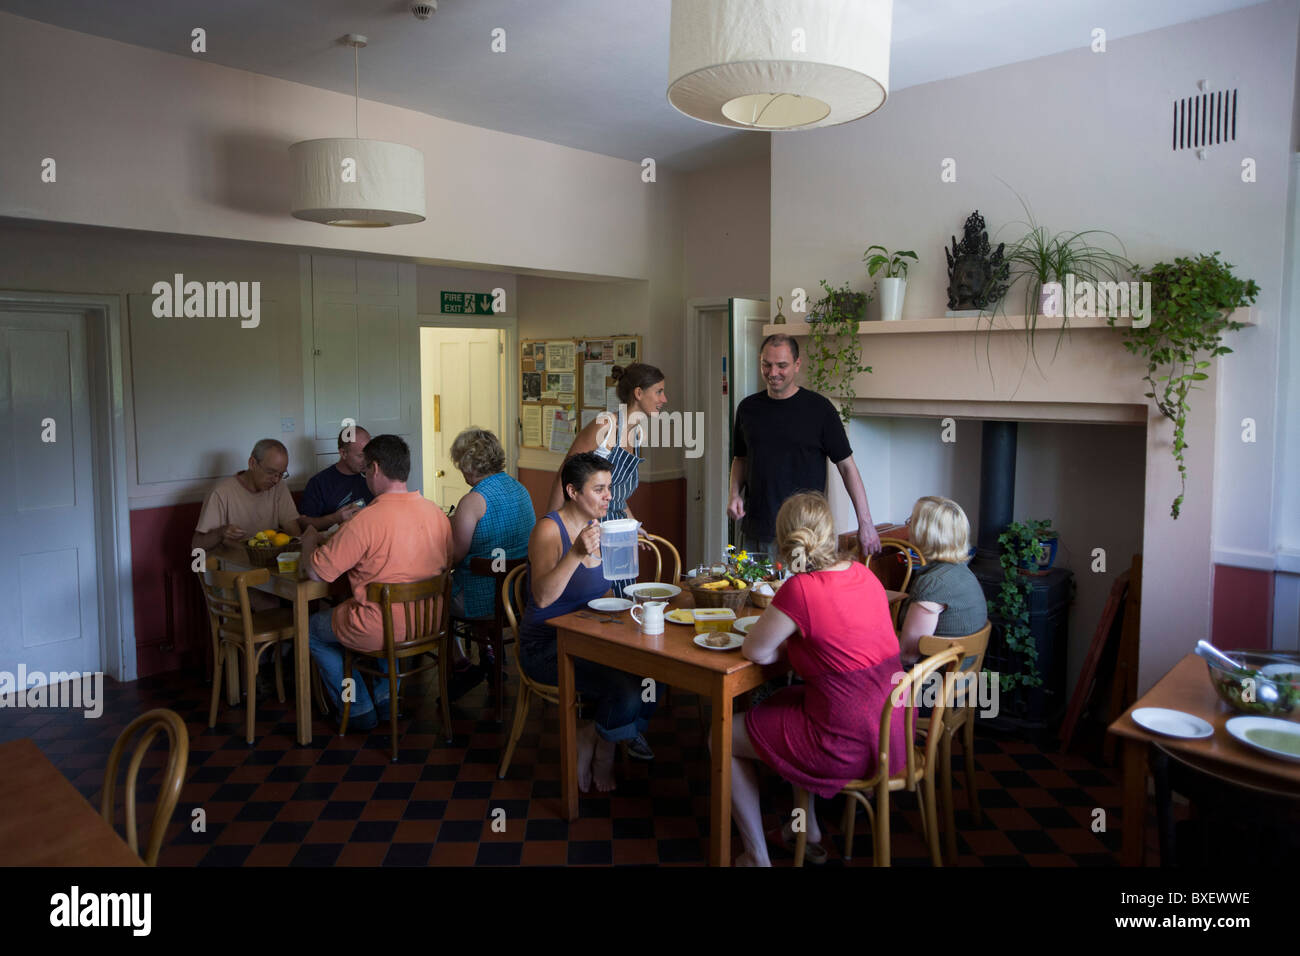 Mealtime for visitors in dining room at the Rivendell Buddhist Retreat Centre, East Sussex, England. Stock Photo